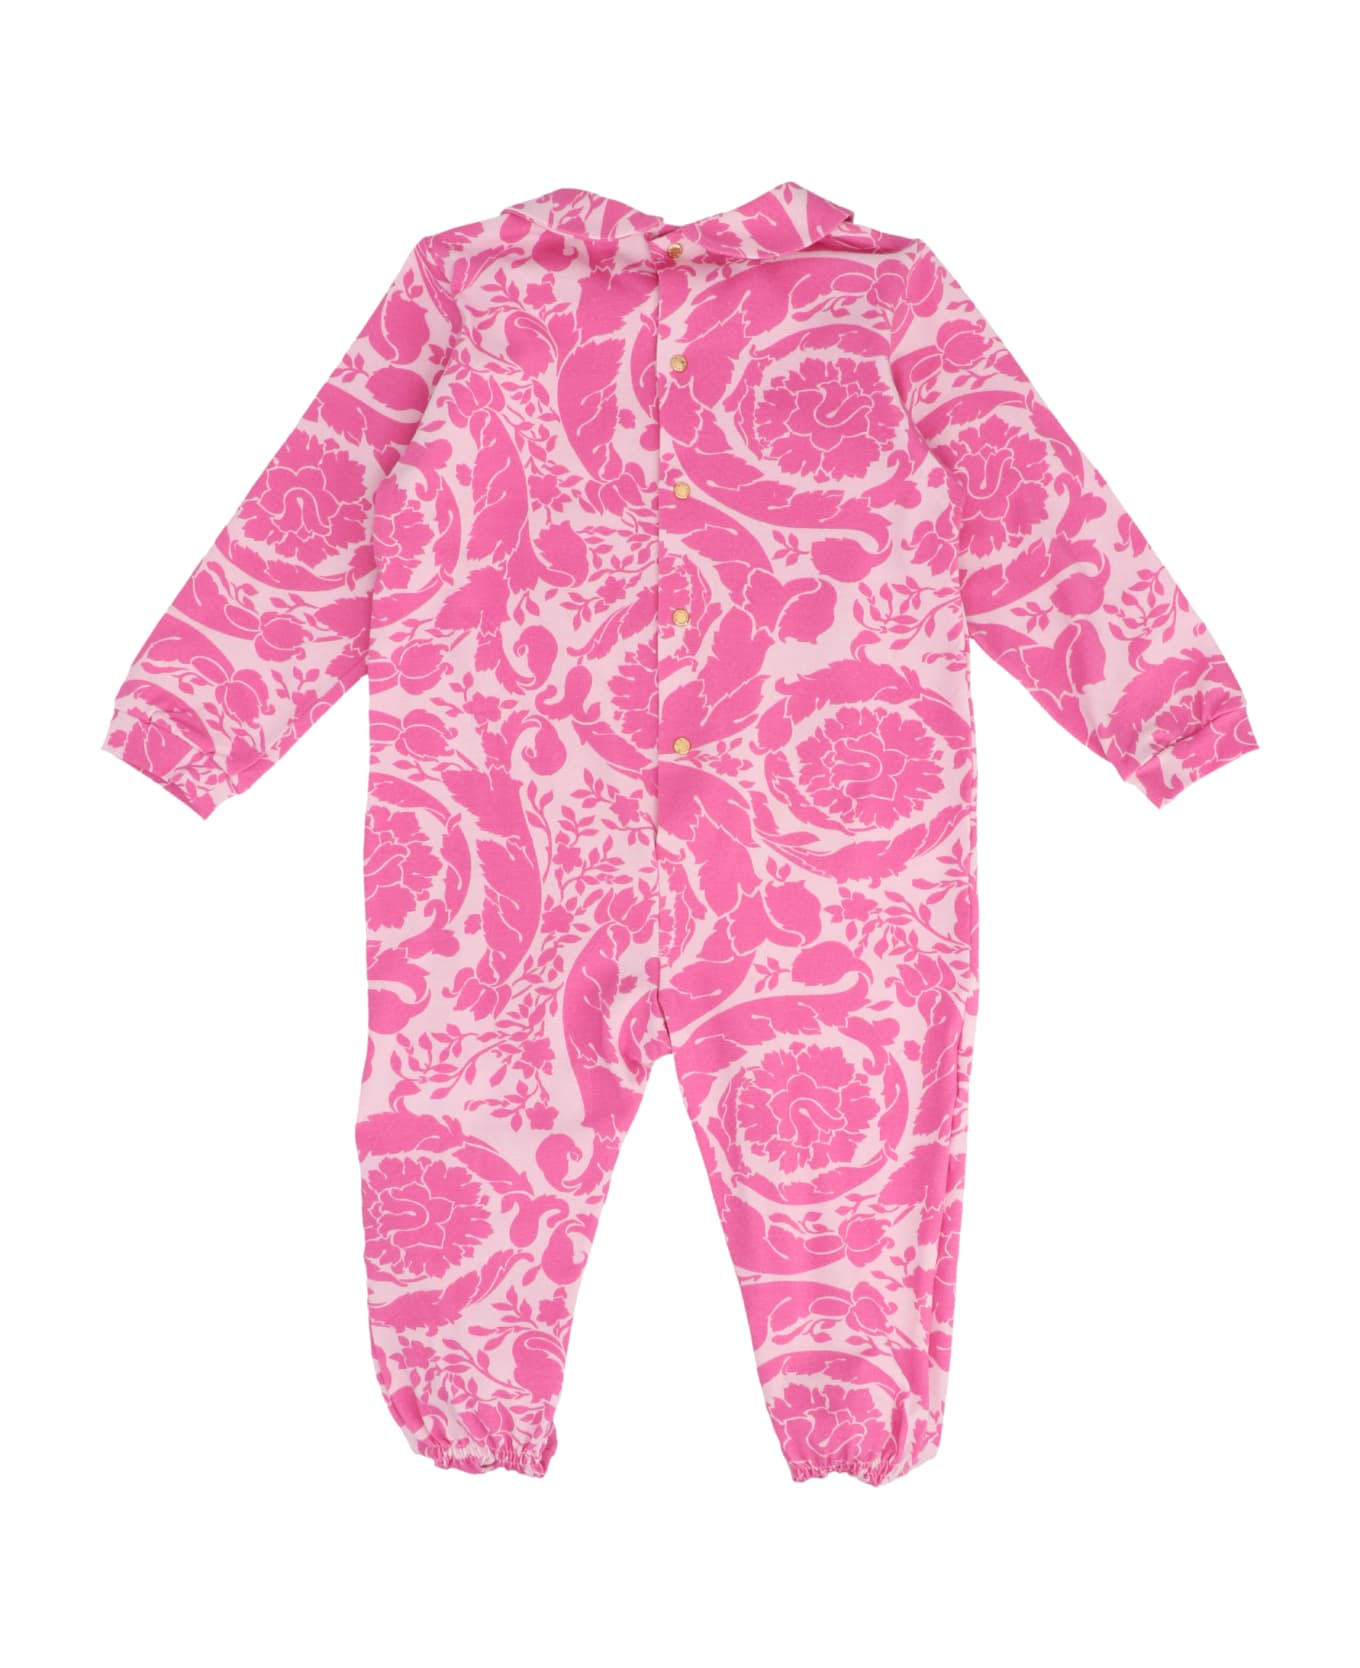 Versace 'barocco' Sleepsuit + Hat floral-embroidered Baby Set - Pink